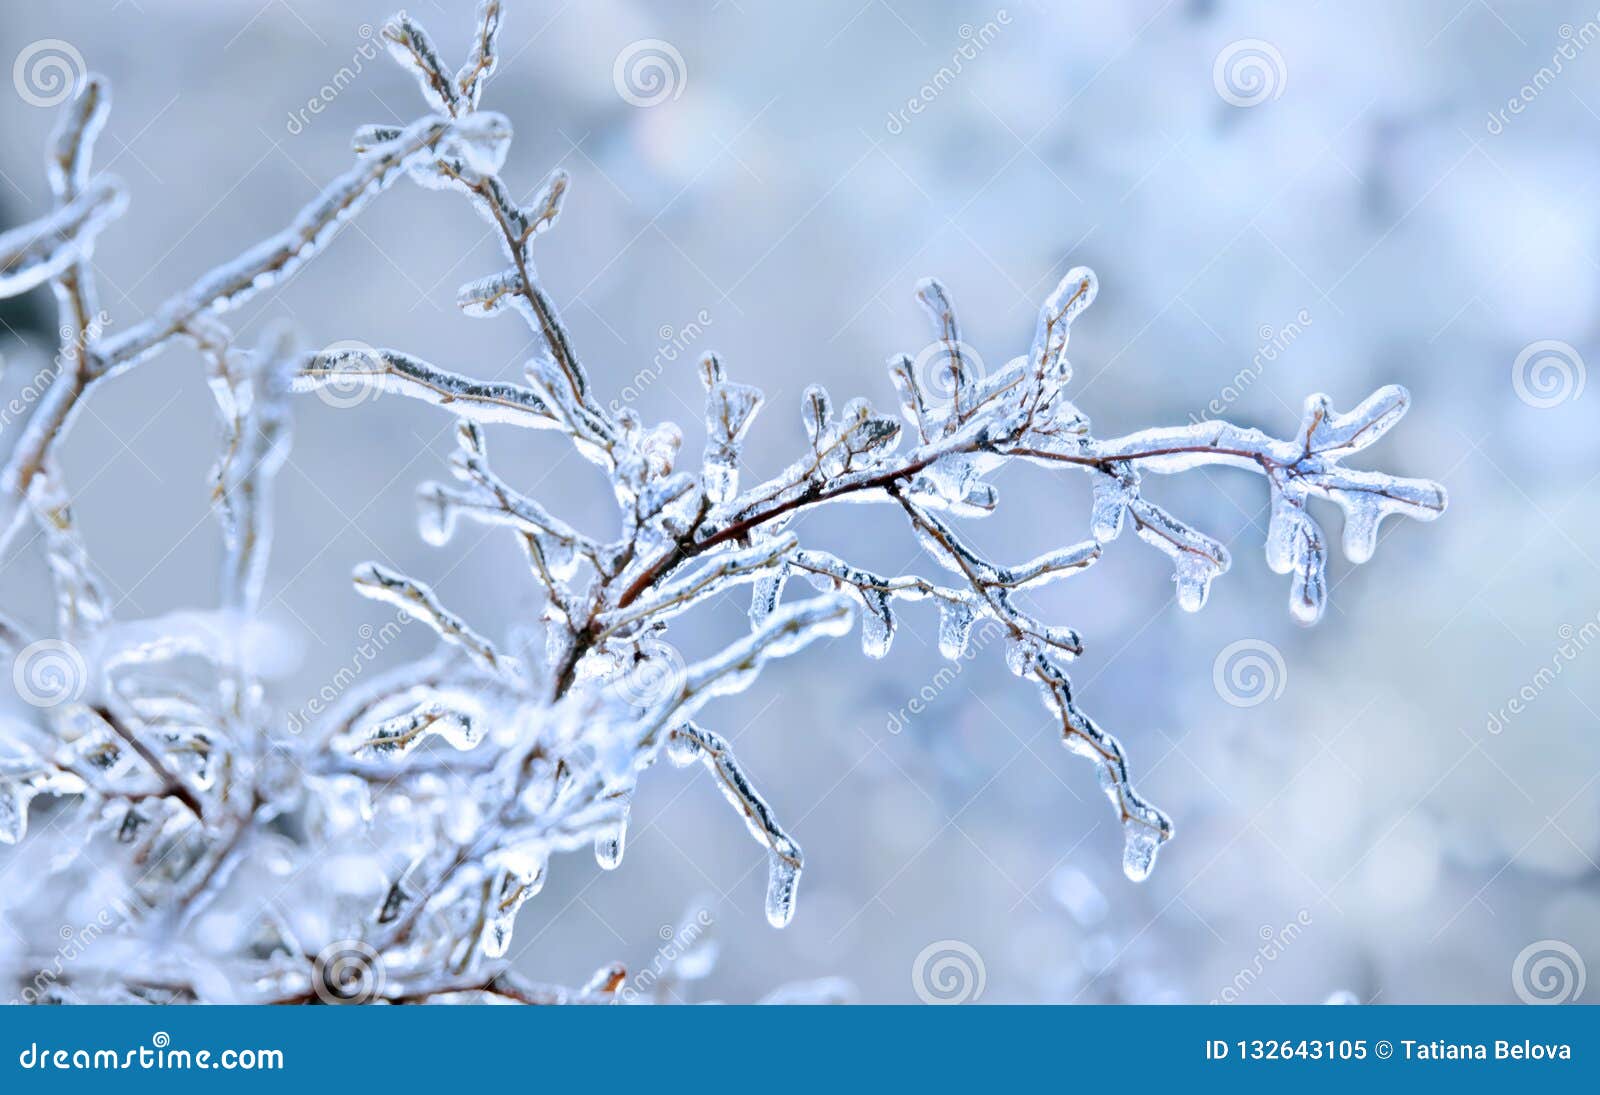 Winter Icy Branch. Winter Background Stock Image - Image of clear ...